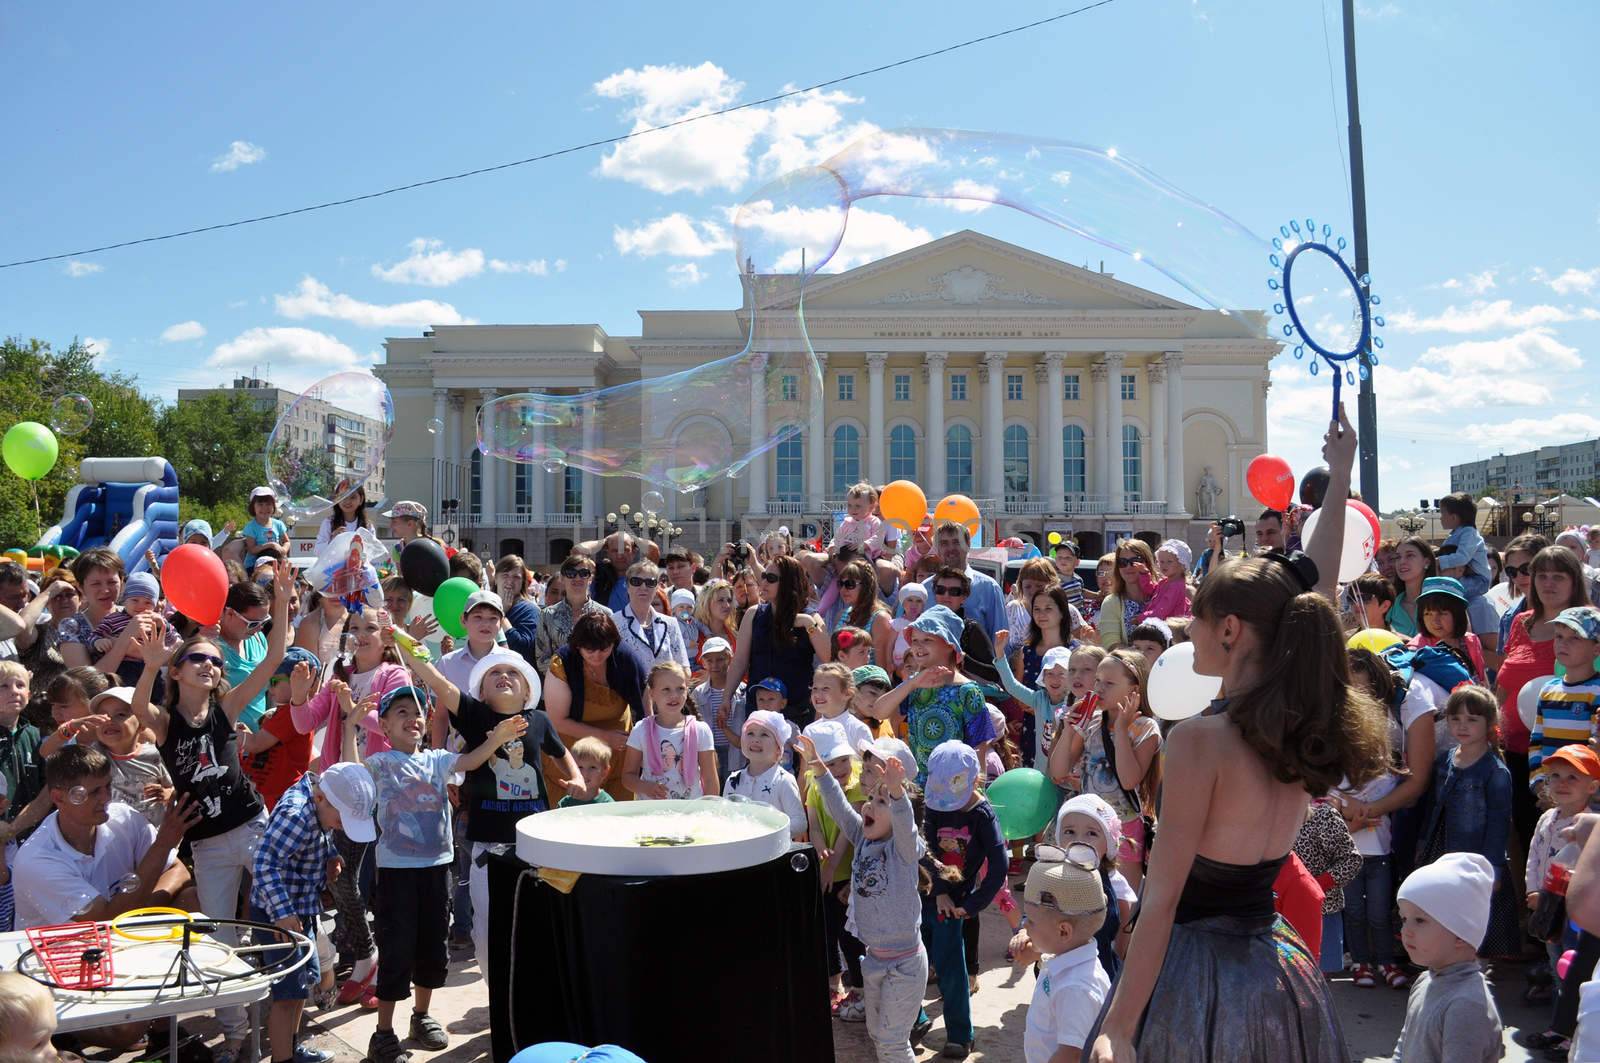 Happy children catch soap bubbles on the street in the city of Tyumen, Russia.